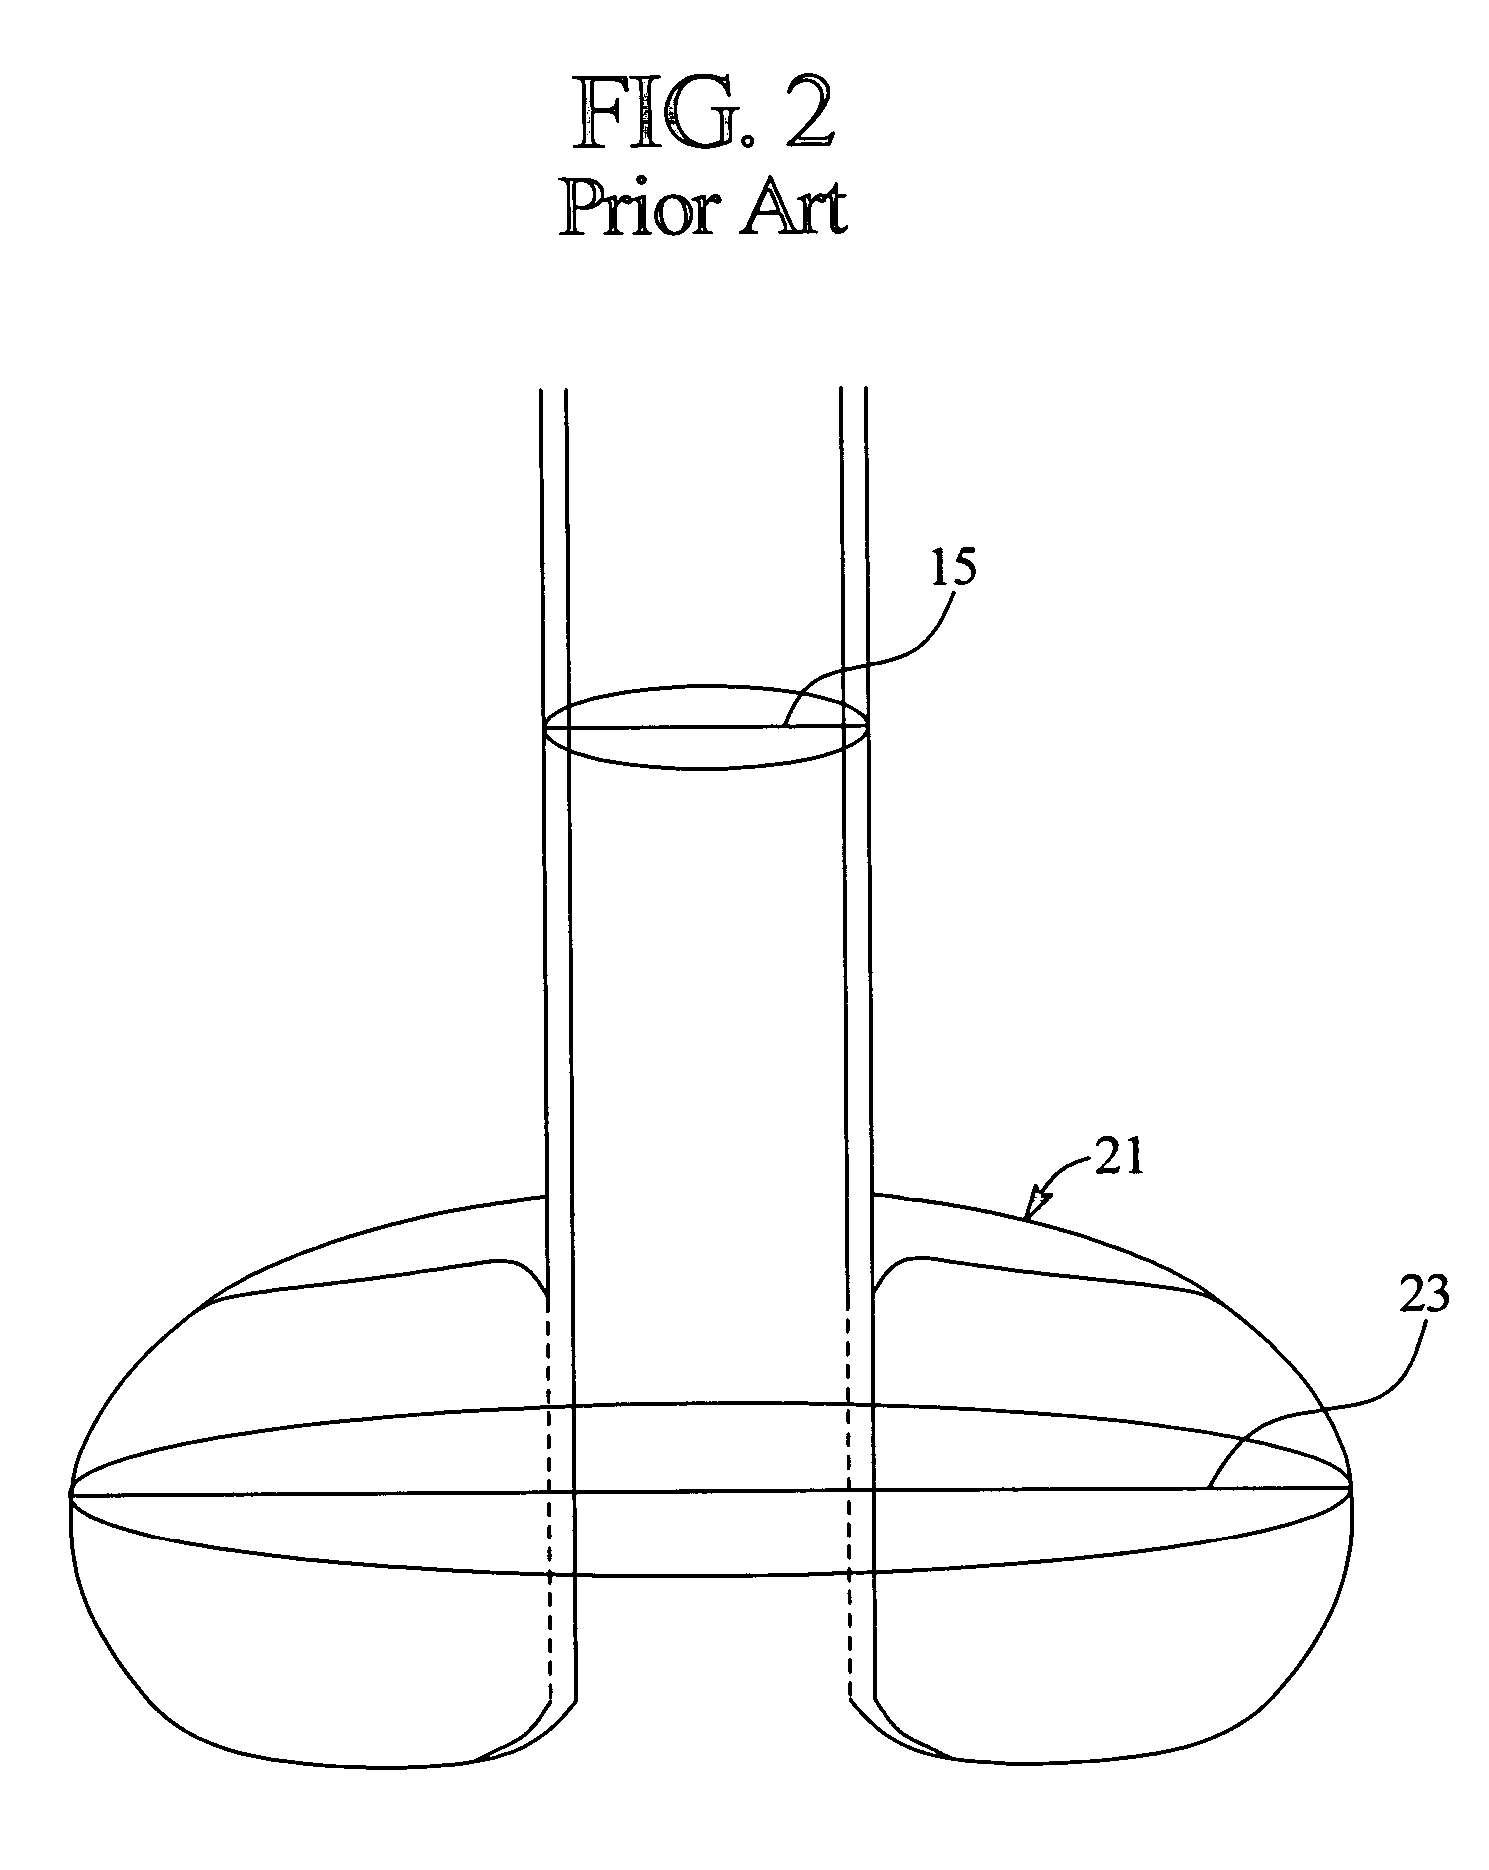 System and method for securing a medical access device